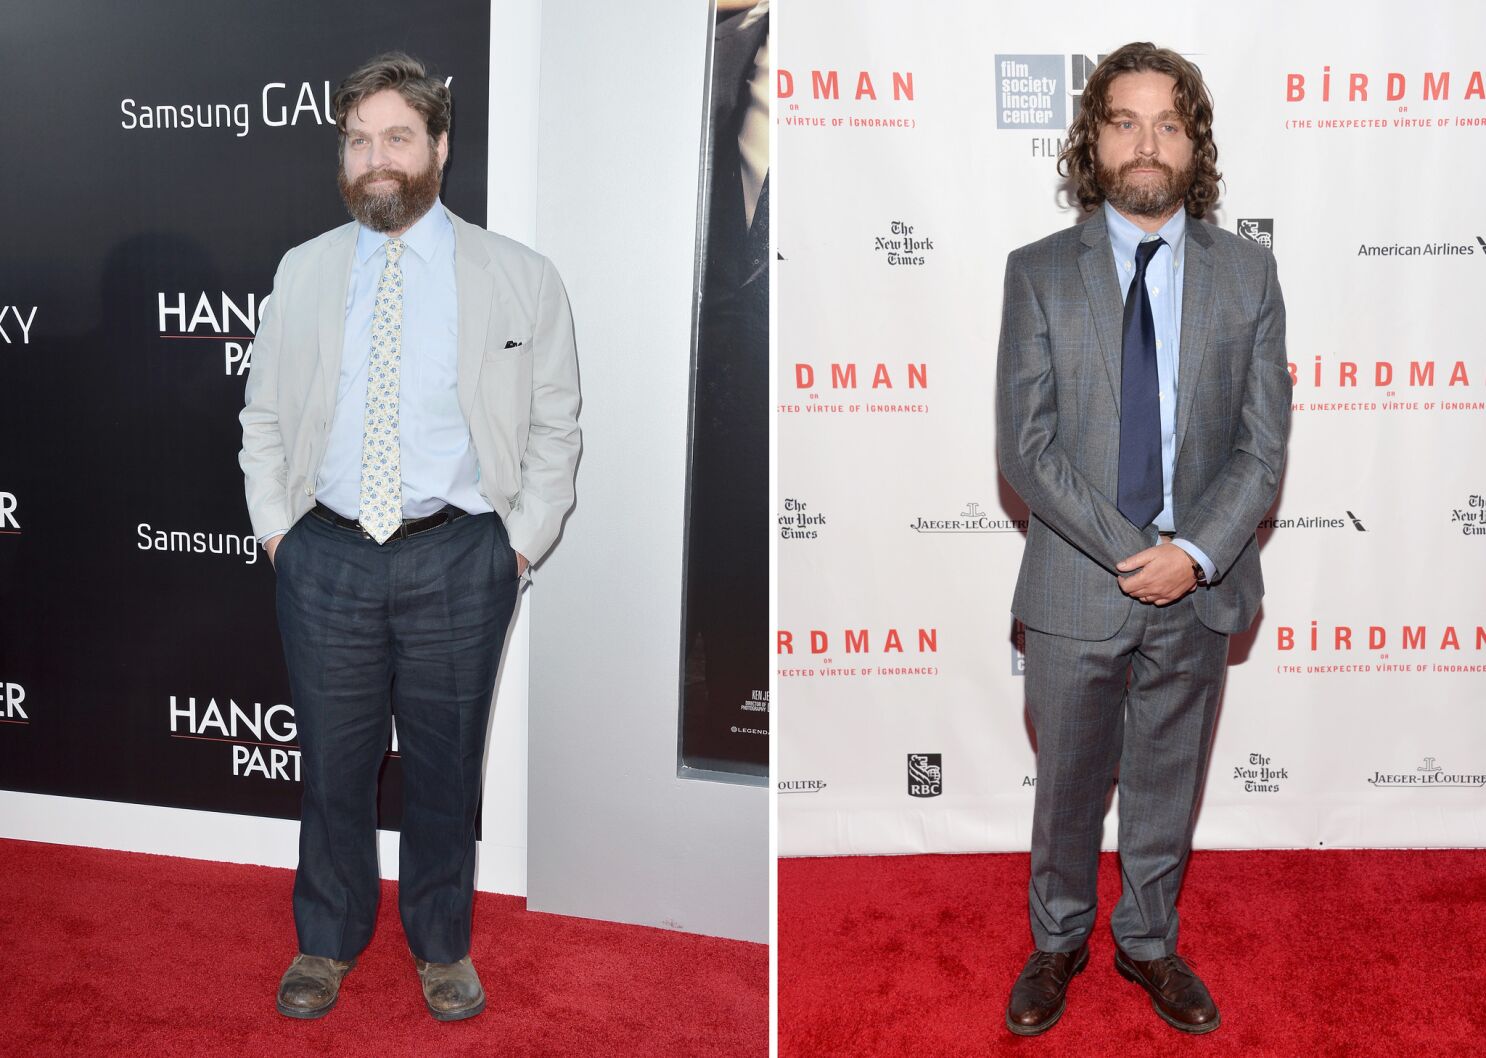 lave mad himmel ligegyldighed Slimmed-down Zach Galifianakis hits 'Birdman' screening in New York - Los  Angeles Times